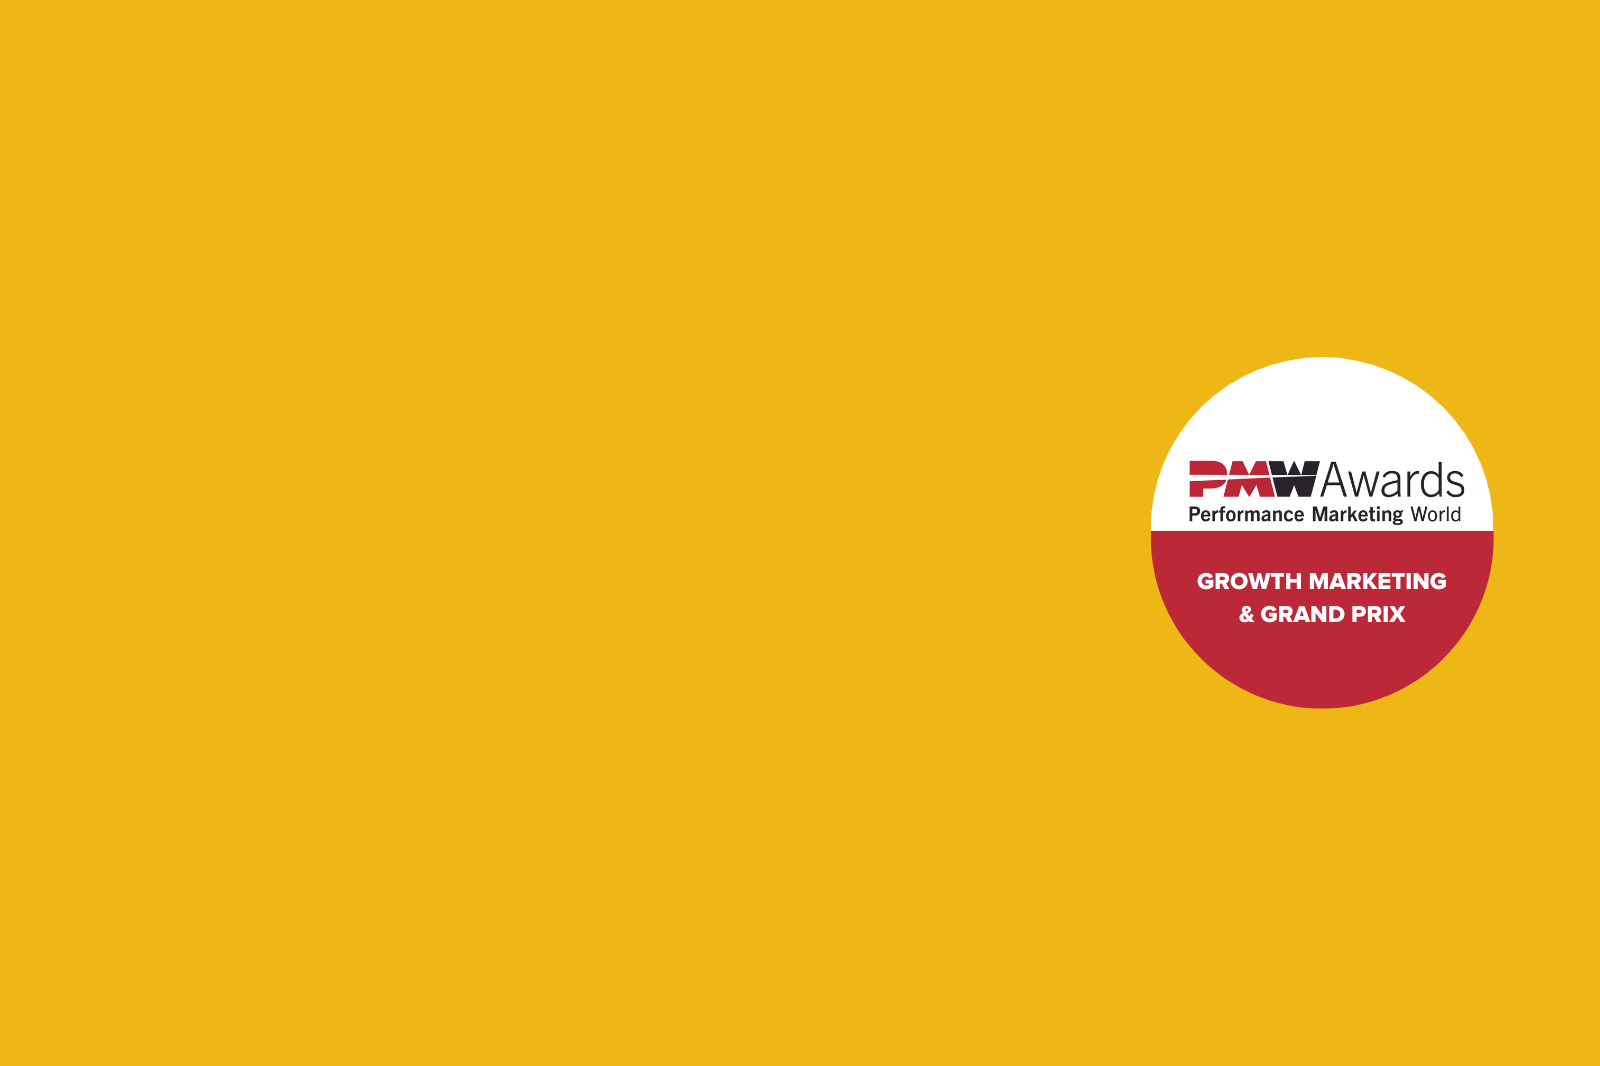 A yellow background with a red Performance Marketing World logo on it.